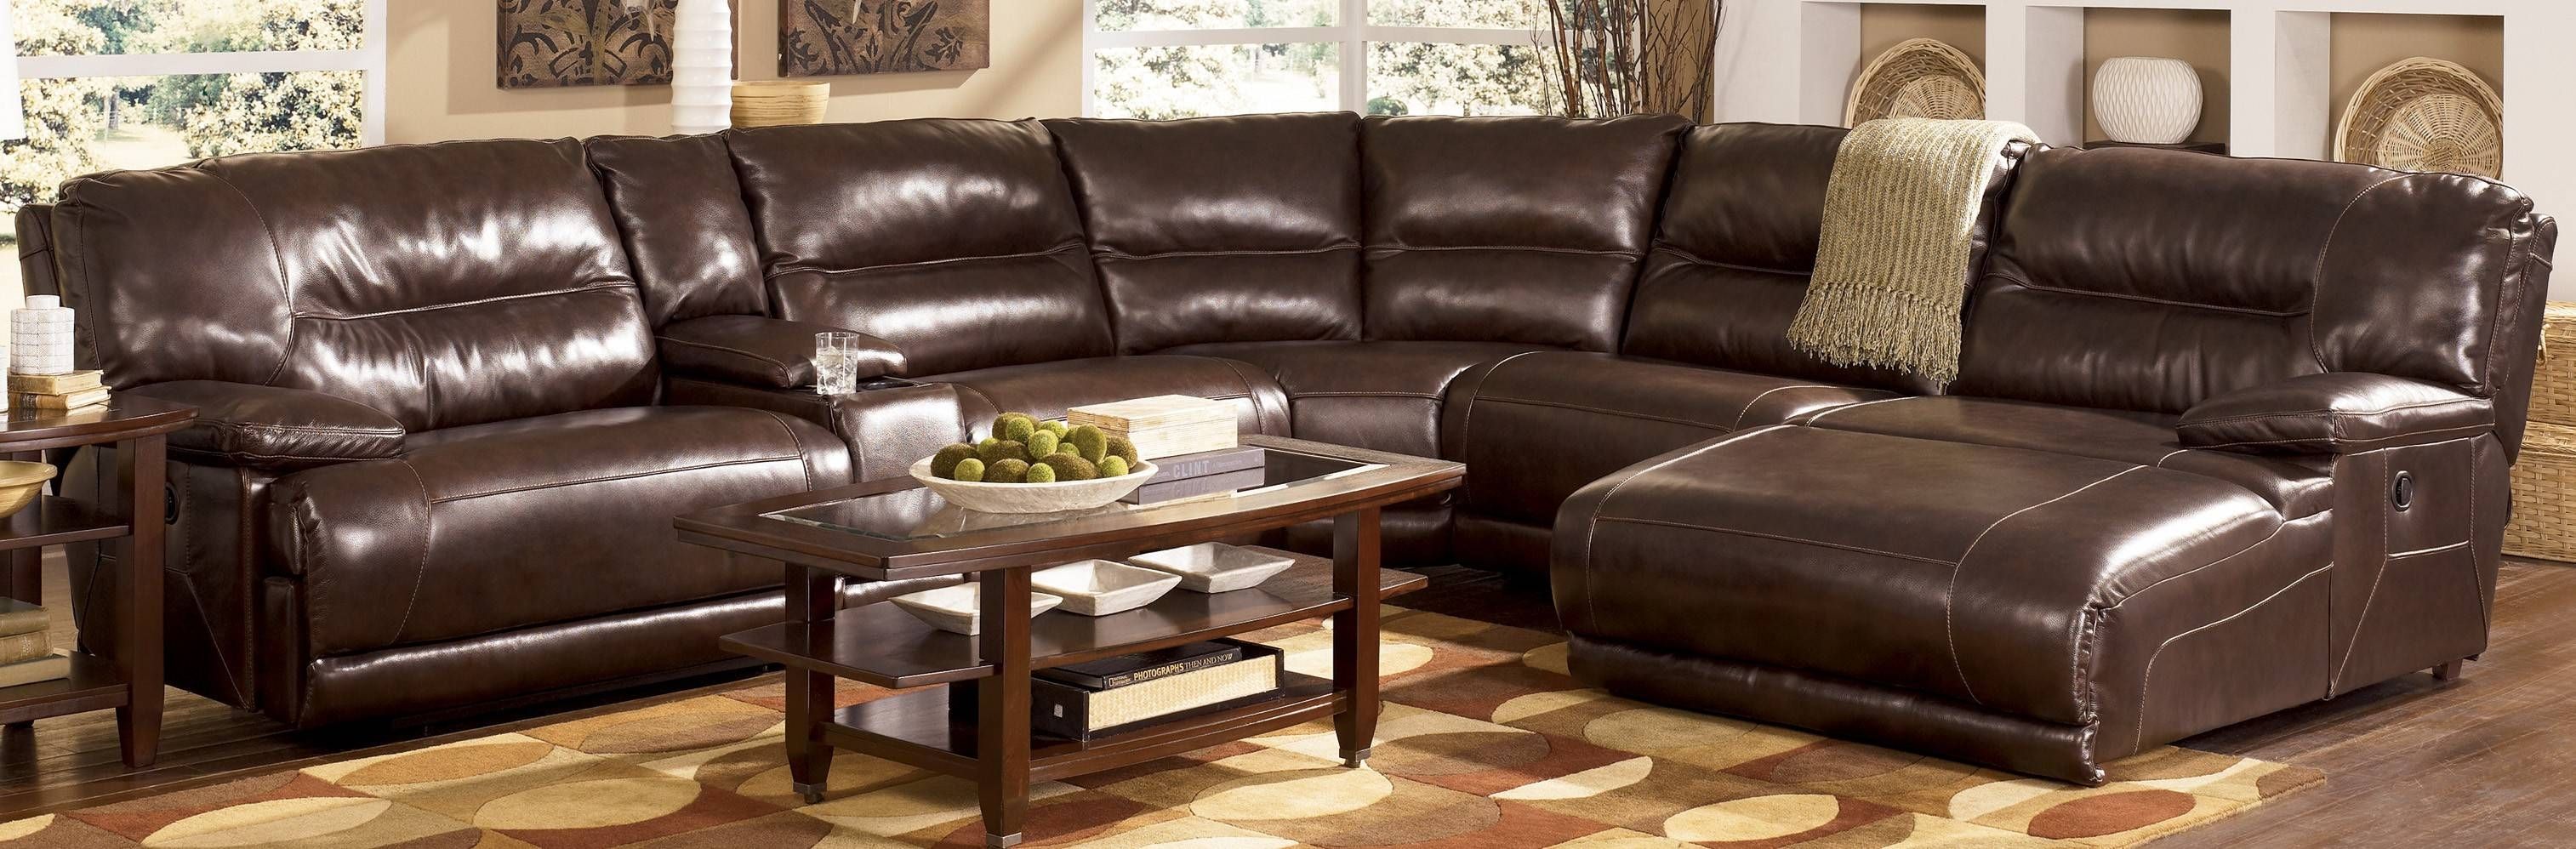 Sofas Center : Faux Leather Sectional Sofas Ikea Literarywondrous Intended For Faux Leather Sectional Sofas (View 7 of 25)